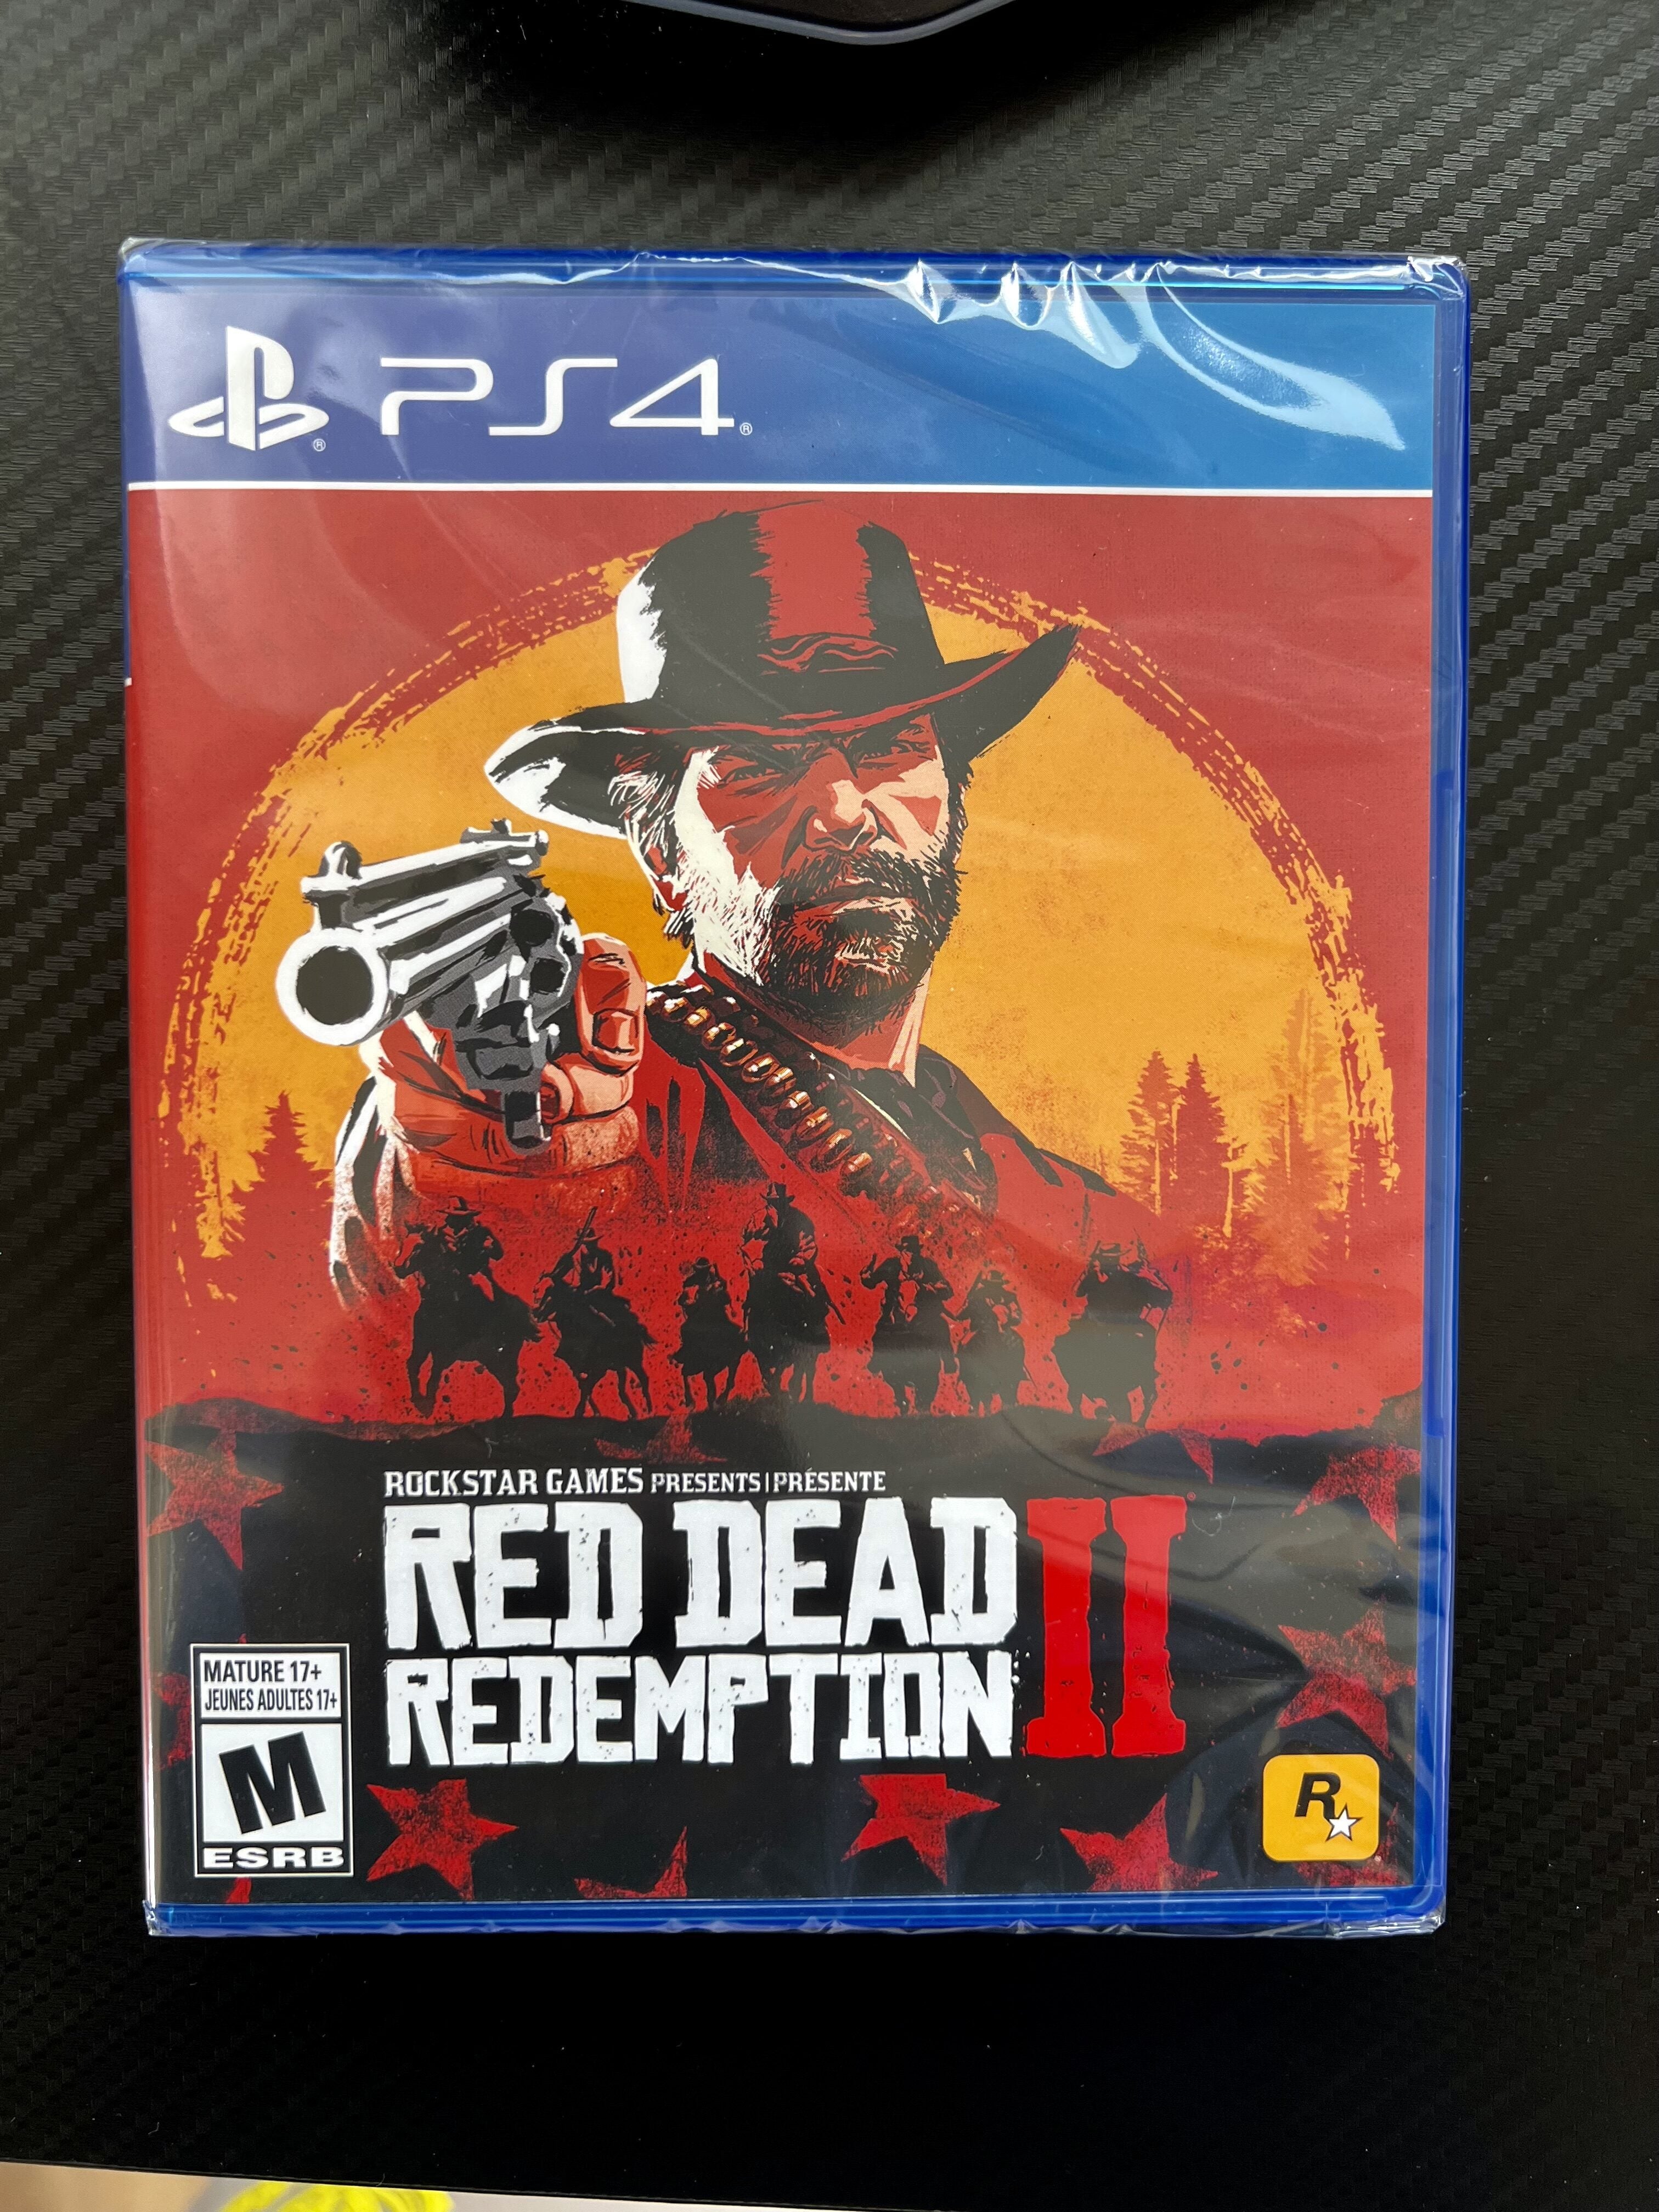 The Red dead redemption 1 map that came with the physical copy